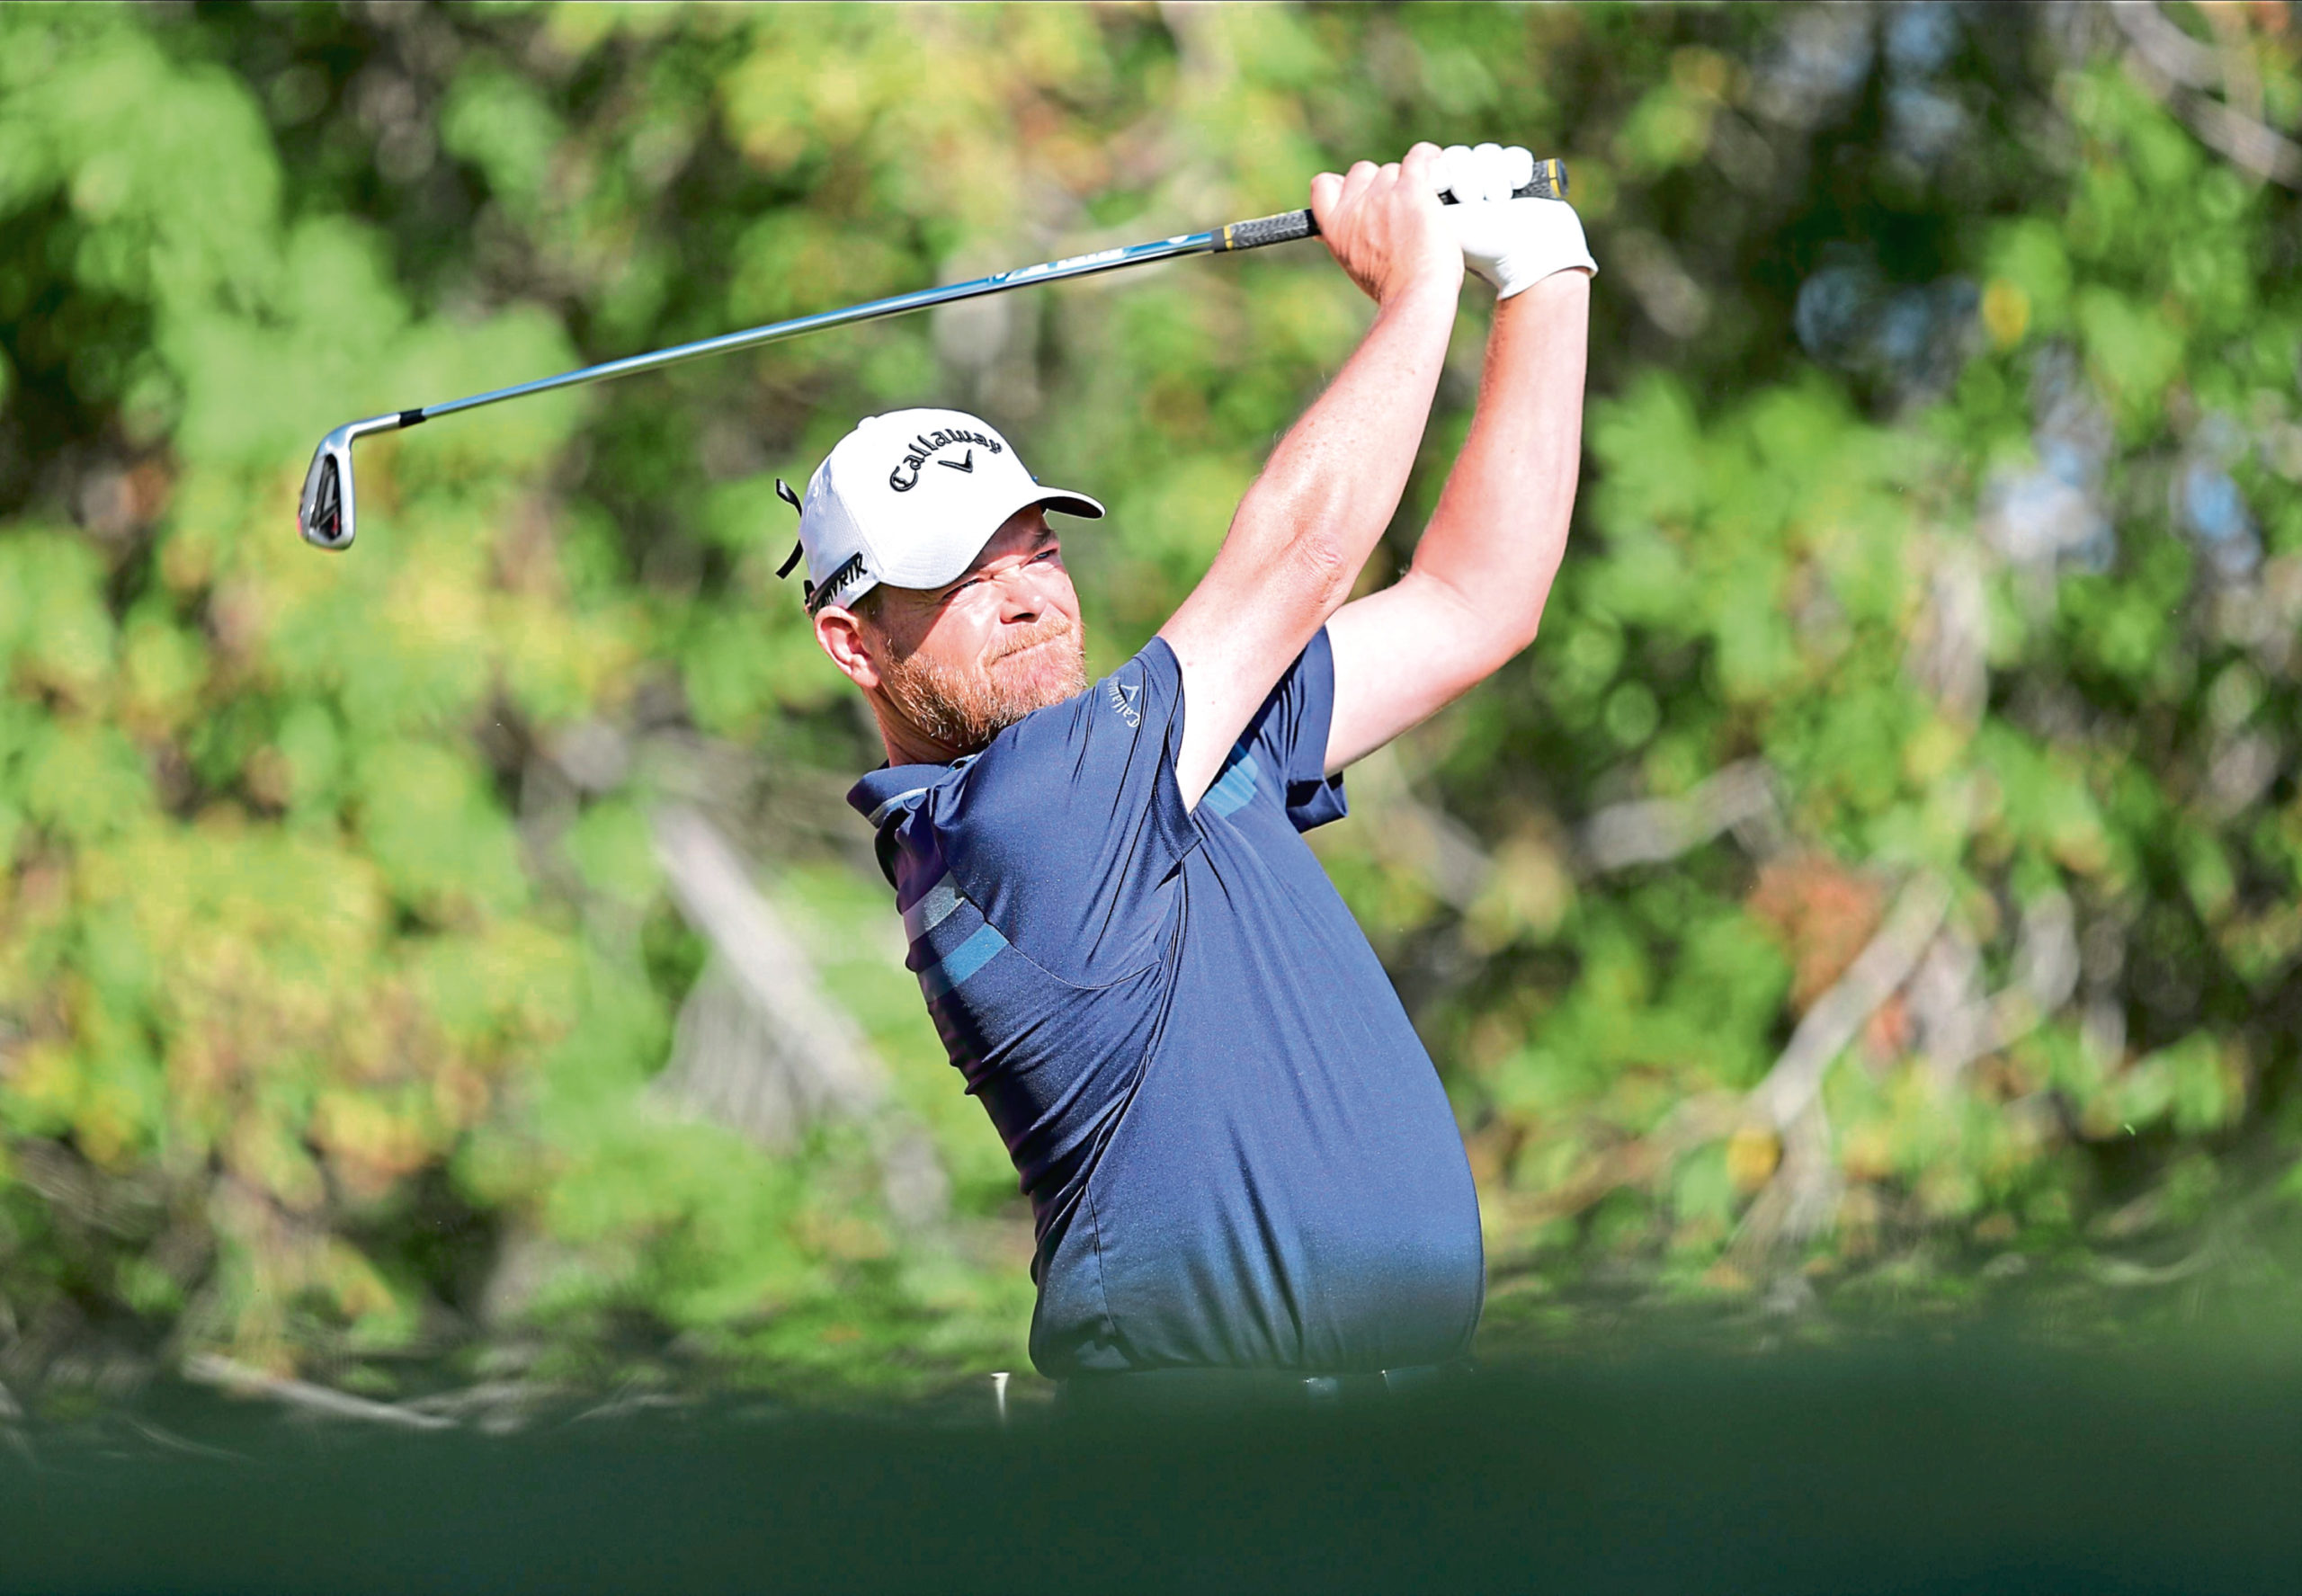 David Drysdale lost a five-hole playoff at the Qatar Masters in his 498th tour appearance.